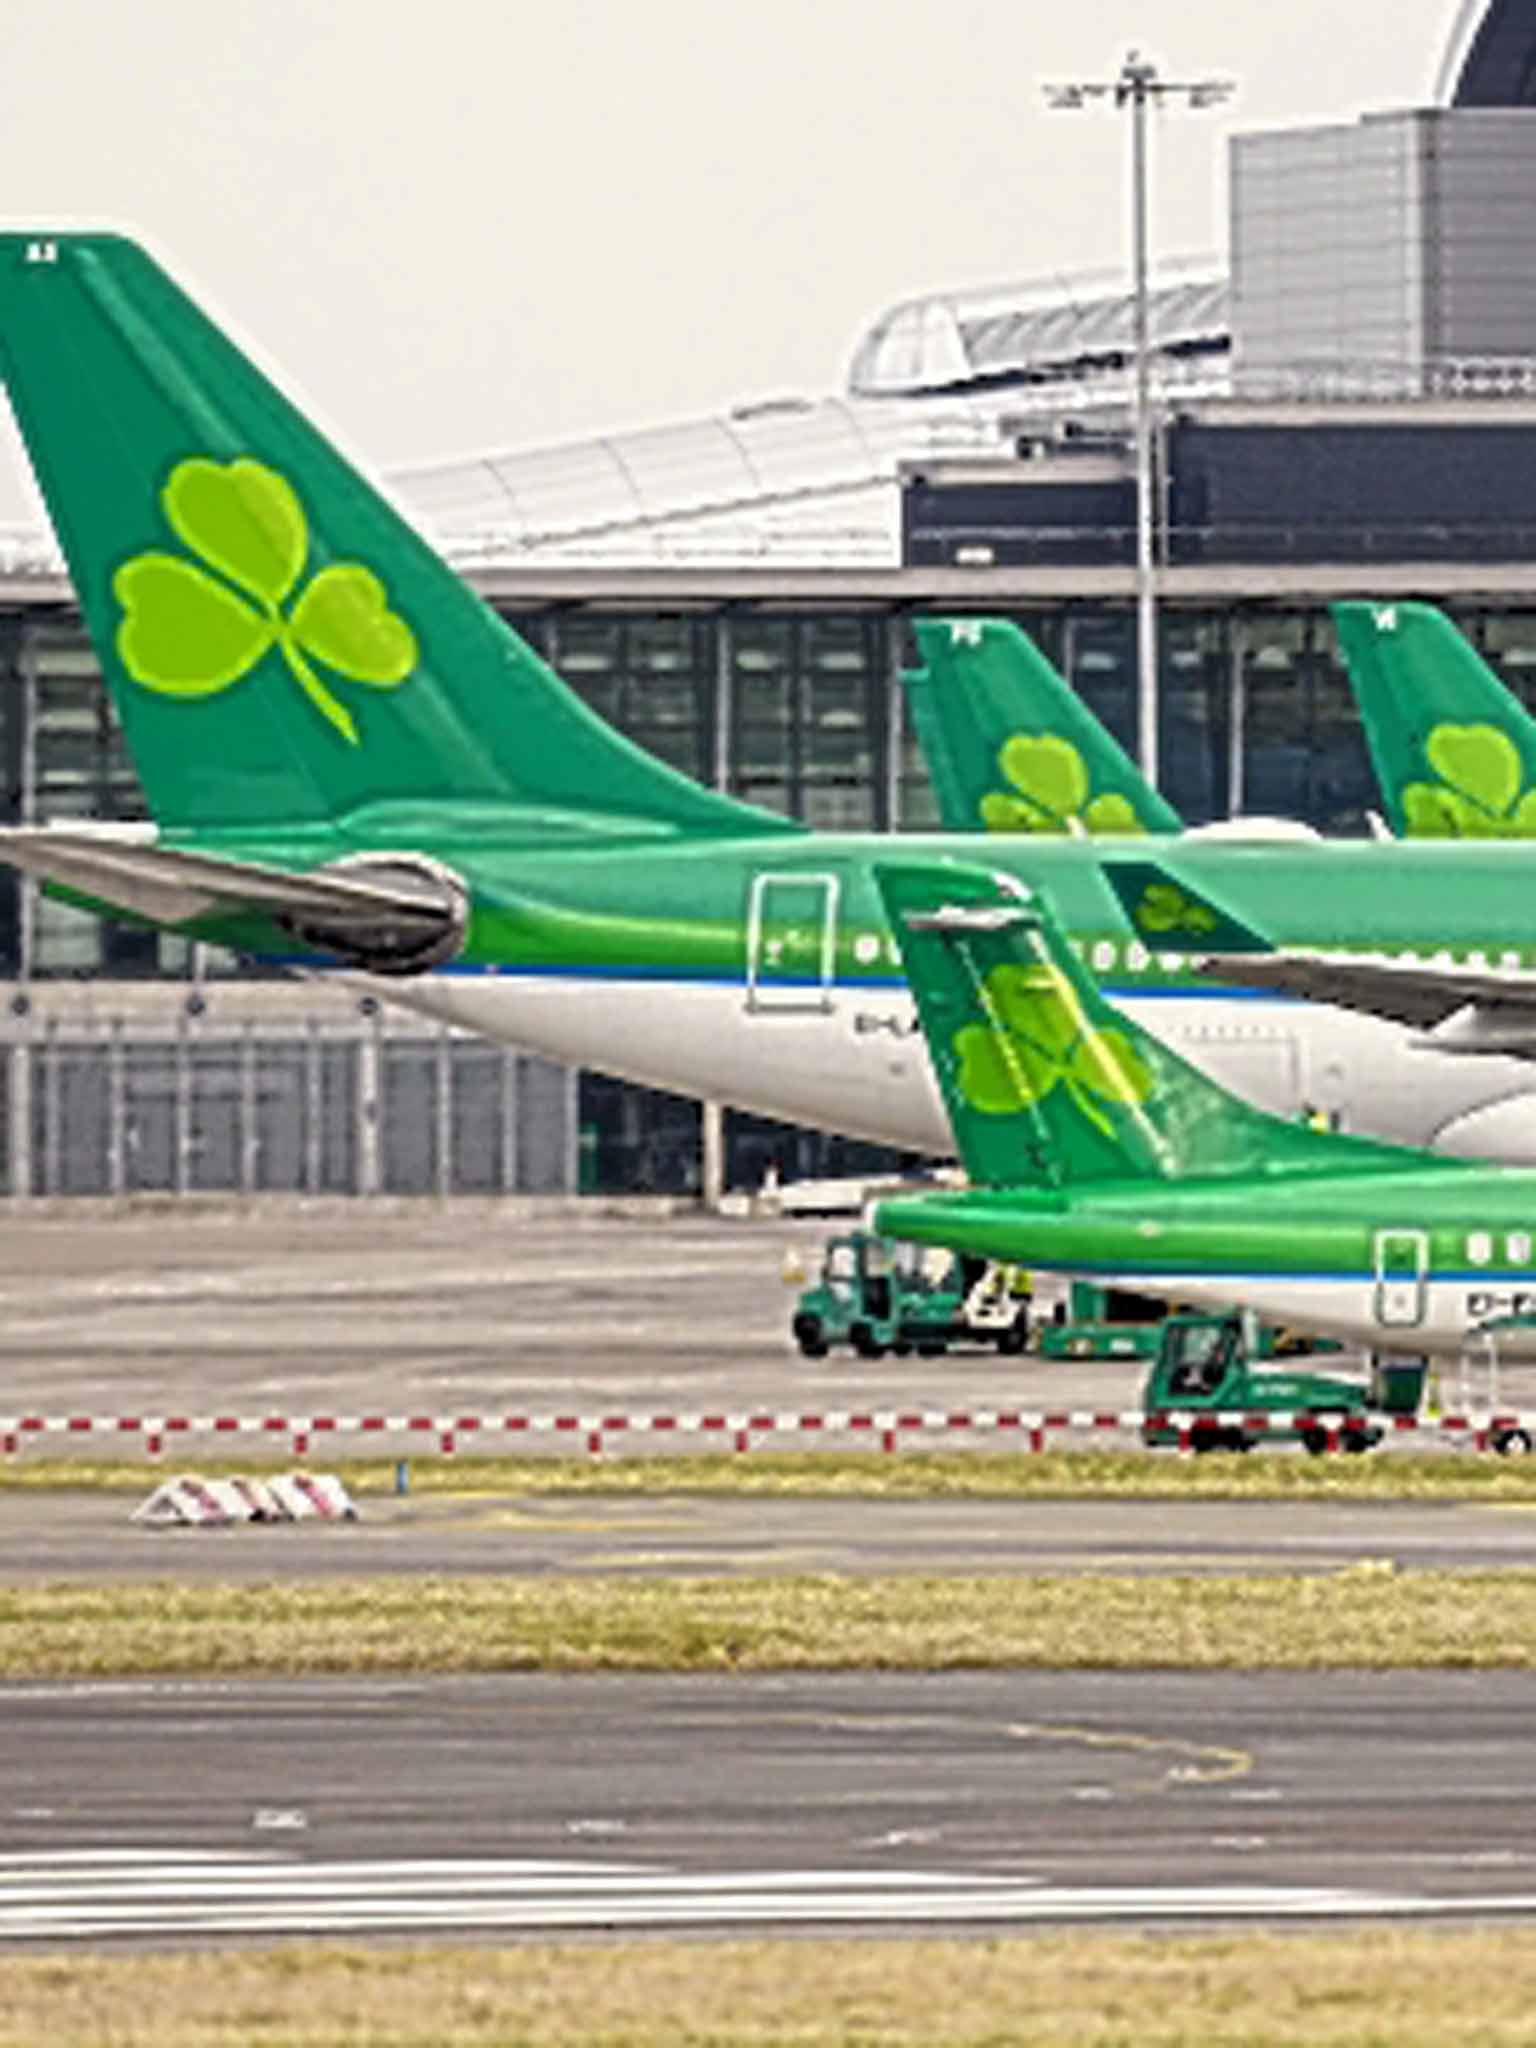 Aer Lingus offers a convenient route to the US